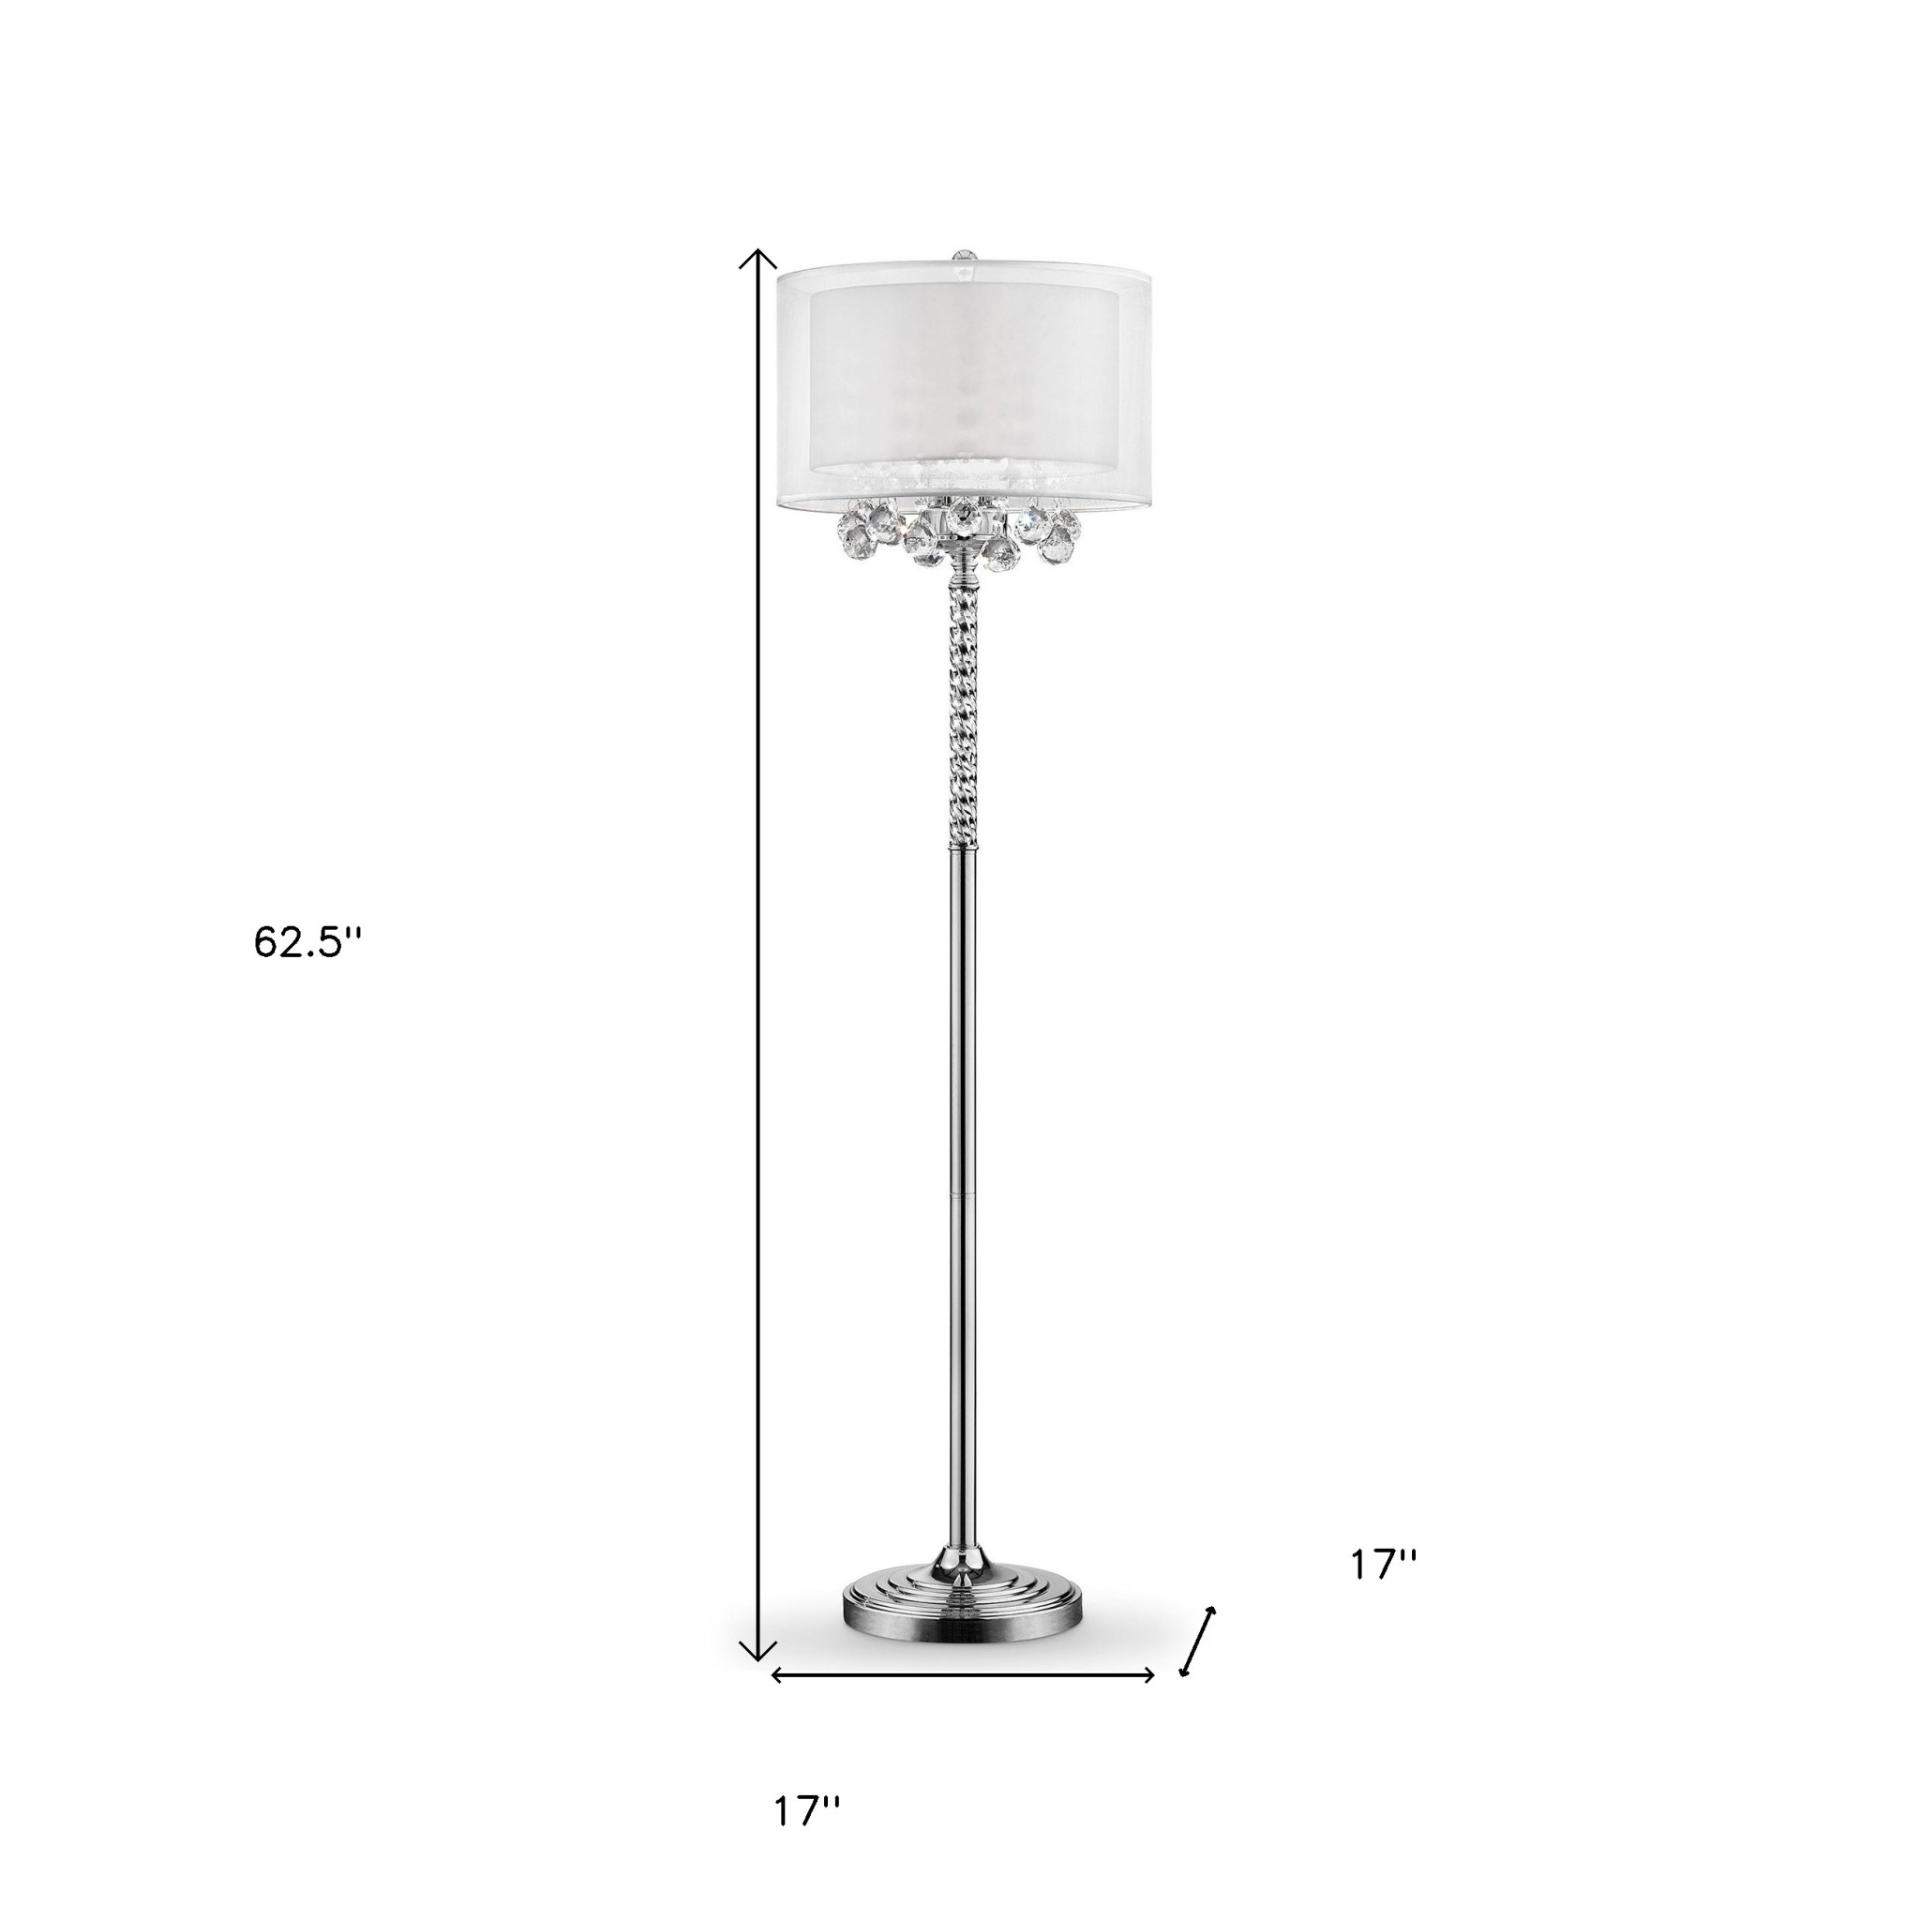 Sleek Three Light Candelabra Floor Lamp with White Shade & Crystal Accents (62.5"H)